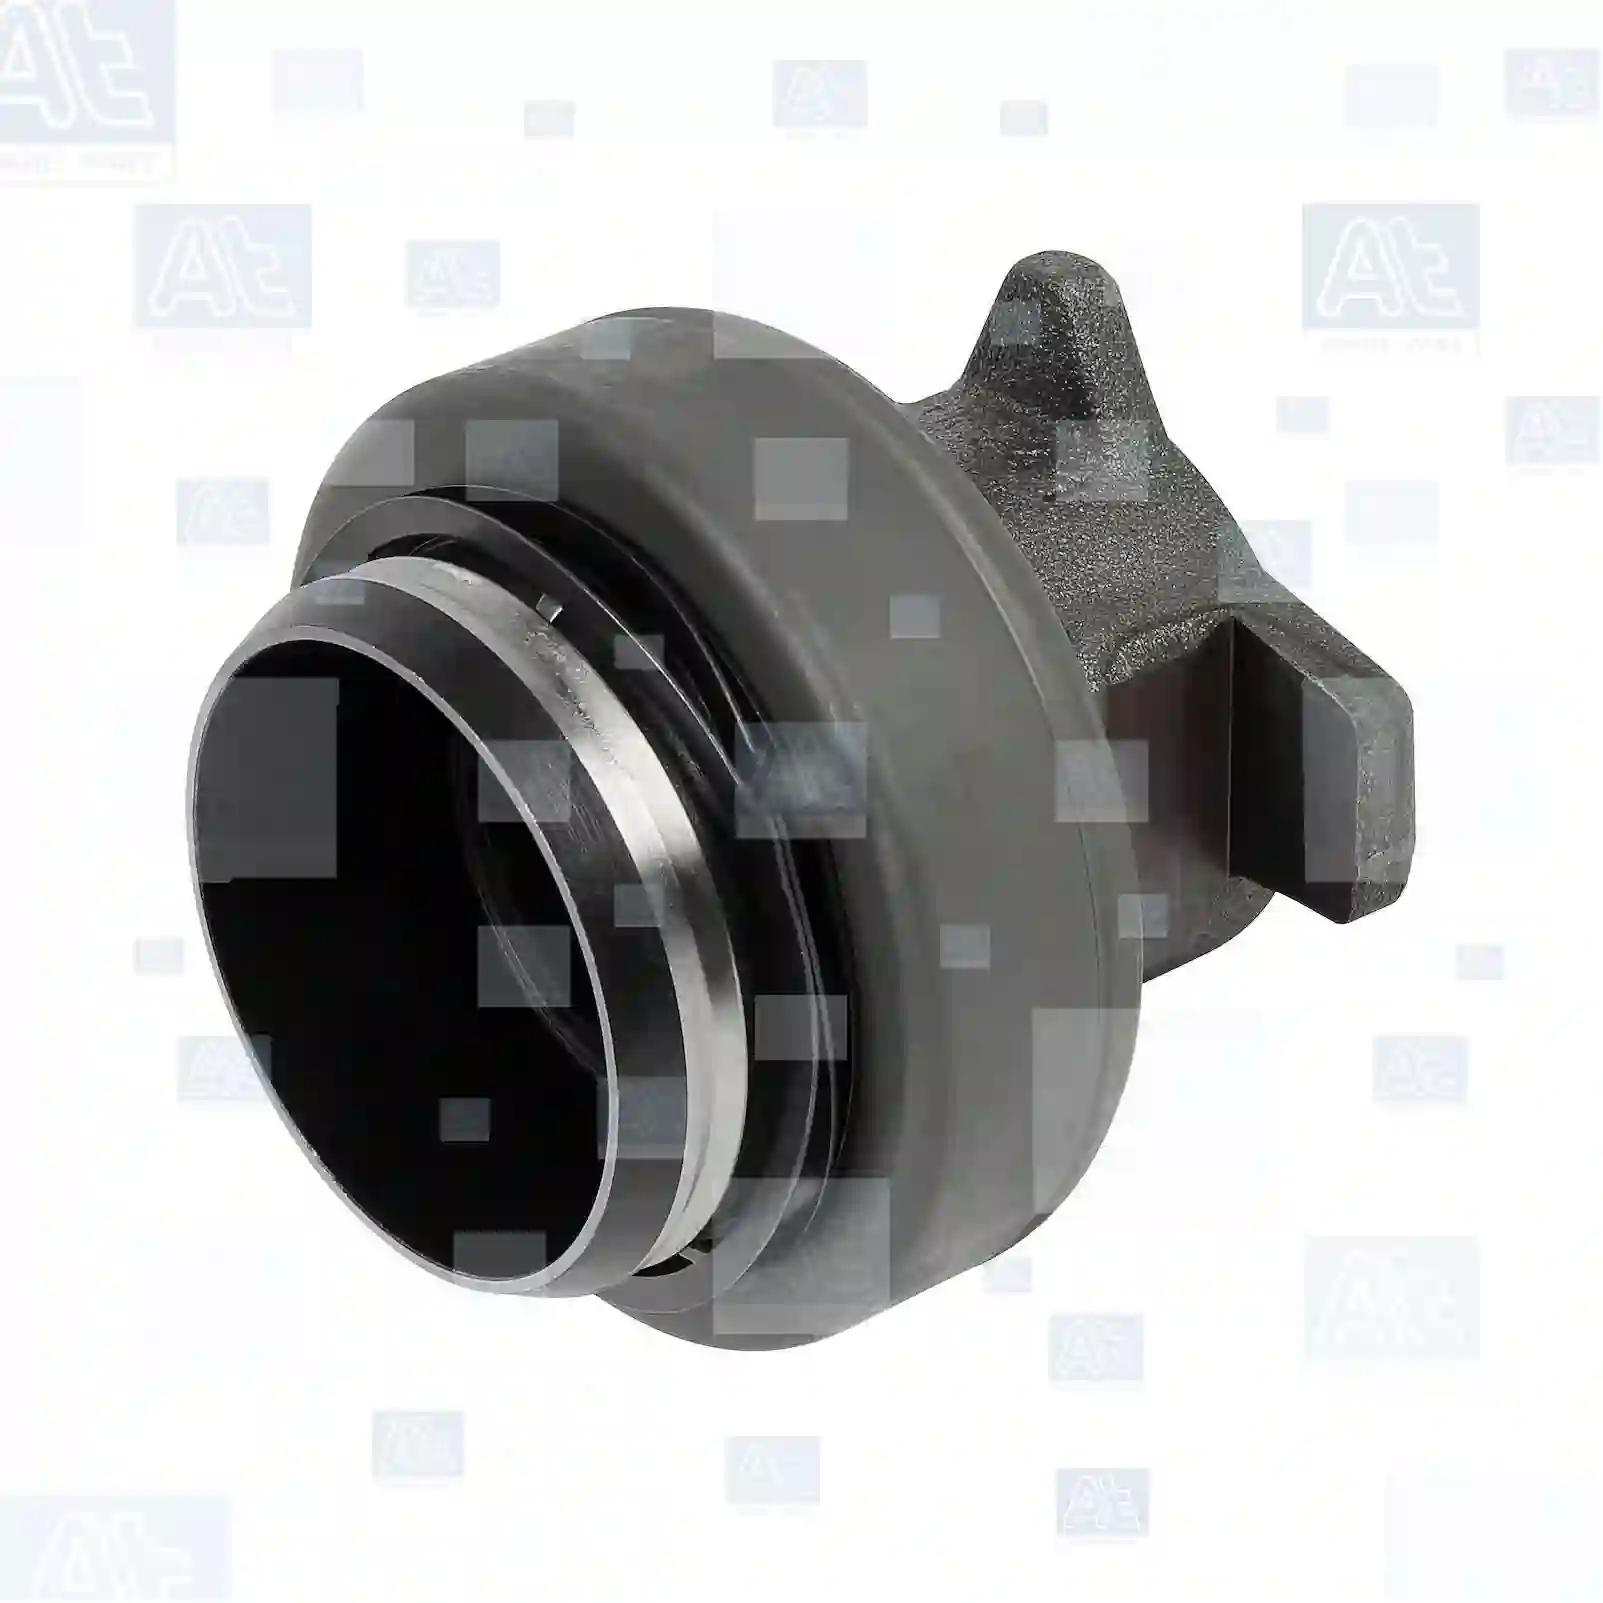 Release bearing, at no 77721917, oem no: 1250710, 1303975, 1362752, 1664346, 1780332, 1810168, 1912689, 1601ZB6080, 312301150A, 31230E0030, 503118408, 51305500002, 51305500004, 51305500005, 51305500006, 51305500010, 81305500005, 81305500063, 81305500067, 81305500071, 81305500073, 81305500077, 81305500087, 81305500088, 81305500092, 81305500094, 81305500103, 81305500106, 81305500107, 81305500109, 81305500110, 81305500116, 85300019010, N1011081570, DO16363, 1305500071, 281305500071, 5618023, 10628942, 10945803, 10996015, 632101620, 2V5141165A At Spare Part | Engine, Accelerator Pedal, Camshaft, Connecting Rod, Crankcase, Crankshaft, Cylinder Head, Engine Suspension Mountings, Exhaust Manifold, Exhaust Gas Recirculation, Filter Kits, Flywheel Housing, General Overhaul Kits, Engine, Intake Manifold, Oil Cleaner, Oil Cooler, Oil Filter, Oil Pump, Oil Sump, Piston & Liner, Sensor & Switch, Timing Case, Turbocharger, Cooling System, Belt Tensioner, Coolant Filter, Coolant Pipe, Corrosion Prevention Agent, Drive, Expansion Tank, Fan, Intercooler, Monitors & Gauges, Radiator, Thermostat, V-Belt / Timing belt, Water Pump, Fuel System, Electronical Injector Unit, Feed Pump, Fuel Filter, cpl., Fuel Gauge Sender,  Fuel Line, Fuel Pump, Fuel Tank, Injection Line Kit, Injection Pump, Exhaust System, Clutch & Pedal, Gearbox, Propeller Shaft, Axles, Brake System, Hubs & Wheels, Suspension, Leaf Spring, Universal Parts / Accessories, Steering, Electrical System, Cabin Release bearing, at no 77721917, oem no: 1250710, 1303975, 1362752, 1664346, 1780332, 1810168, 1912689, 1601ZB6080, 312301150A, 31230E0030, 503118408, 51305500002, 51305500004, 51305500005, 51305500006, 51305500010, 81305500005, 81305500063, 81305500067, 81305500071, 81305500073, 81305500077, 81305500087, 81305500088, 81305500092, 81305500094, 81305500103, 81305500106, 81305500107, 81305500109, 81305500110, 81305500116, 85300019010, N1011081570, DO16363, 1305500071, 281305500071, 5618023, 10628942, 10945803, 10996015, 632101620, 2V5141165A At Spare Part | Engine, Accelerator Pedal, Camshaft, Connecting Rod, Crankcase, Crankshaft, Cylinder Head, Engine Suspension Mountings, Exhaust Manifold, Exhaust Gas Recirculation, Filter Kits, Flywheel Housing, General Overhaul Kits, Engine, Intake Manifold, Oil Cleaner, Oil Cooler, Oil Filter, Oil Pump, Oil Sump, Piston & Liner, Sensor & Switch, Timing Case, Turbocharger, Cooling System, Belt Tensioner, Coolant Filter, Coolant Pipe, Corrosion Prevention Agent, Drive, Expansion Tank, Fan, Intercooler, Monitors & Gauges, Radiator, Thermostat, V-Belt / Timing belt, Water Pump, Fuel System, Electronical Injector Unit, Feed Pump, Fuel Filter, cpl., Fuel Gauge Sender,  Fuel Line, Fuel Pump, Fuel Tank, Injection Line Kit, Injection Pump, Exhaust System, Clutch & Pedal, Gearbox, Propeller Shaft, Axles, Brake System, Hubs & Wheels, Suspension, Leaf Spring, Universal Parts / Accessories, Steering, Electrical System, Cabin